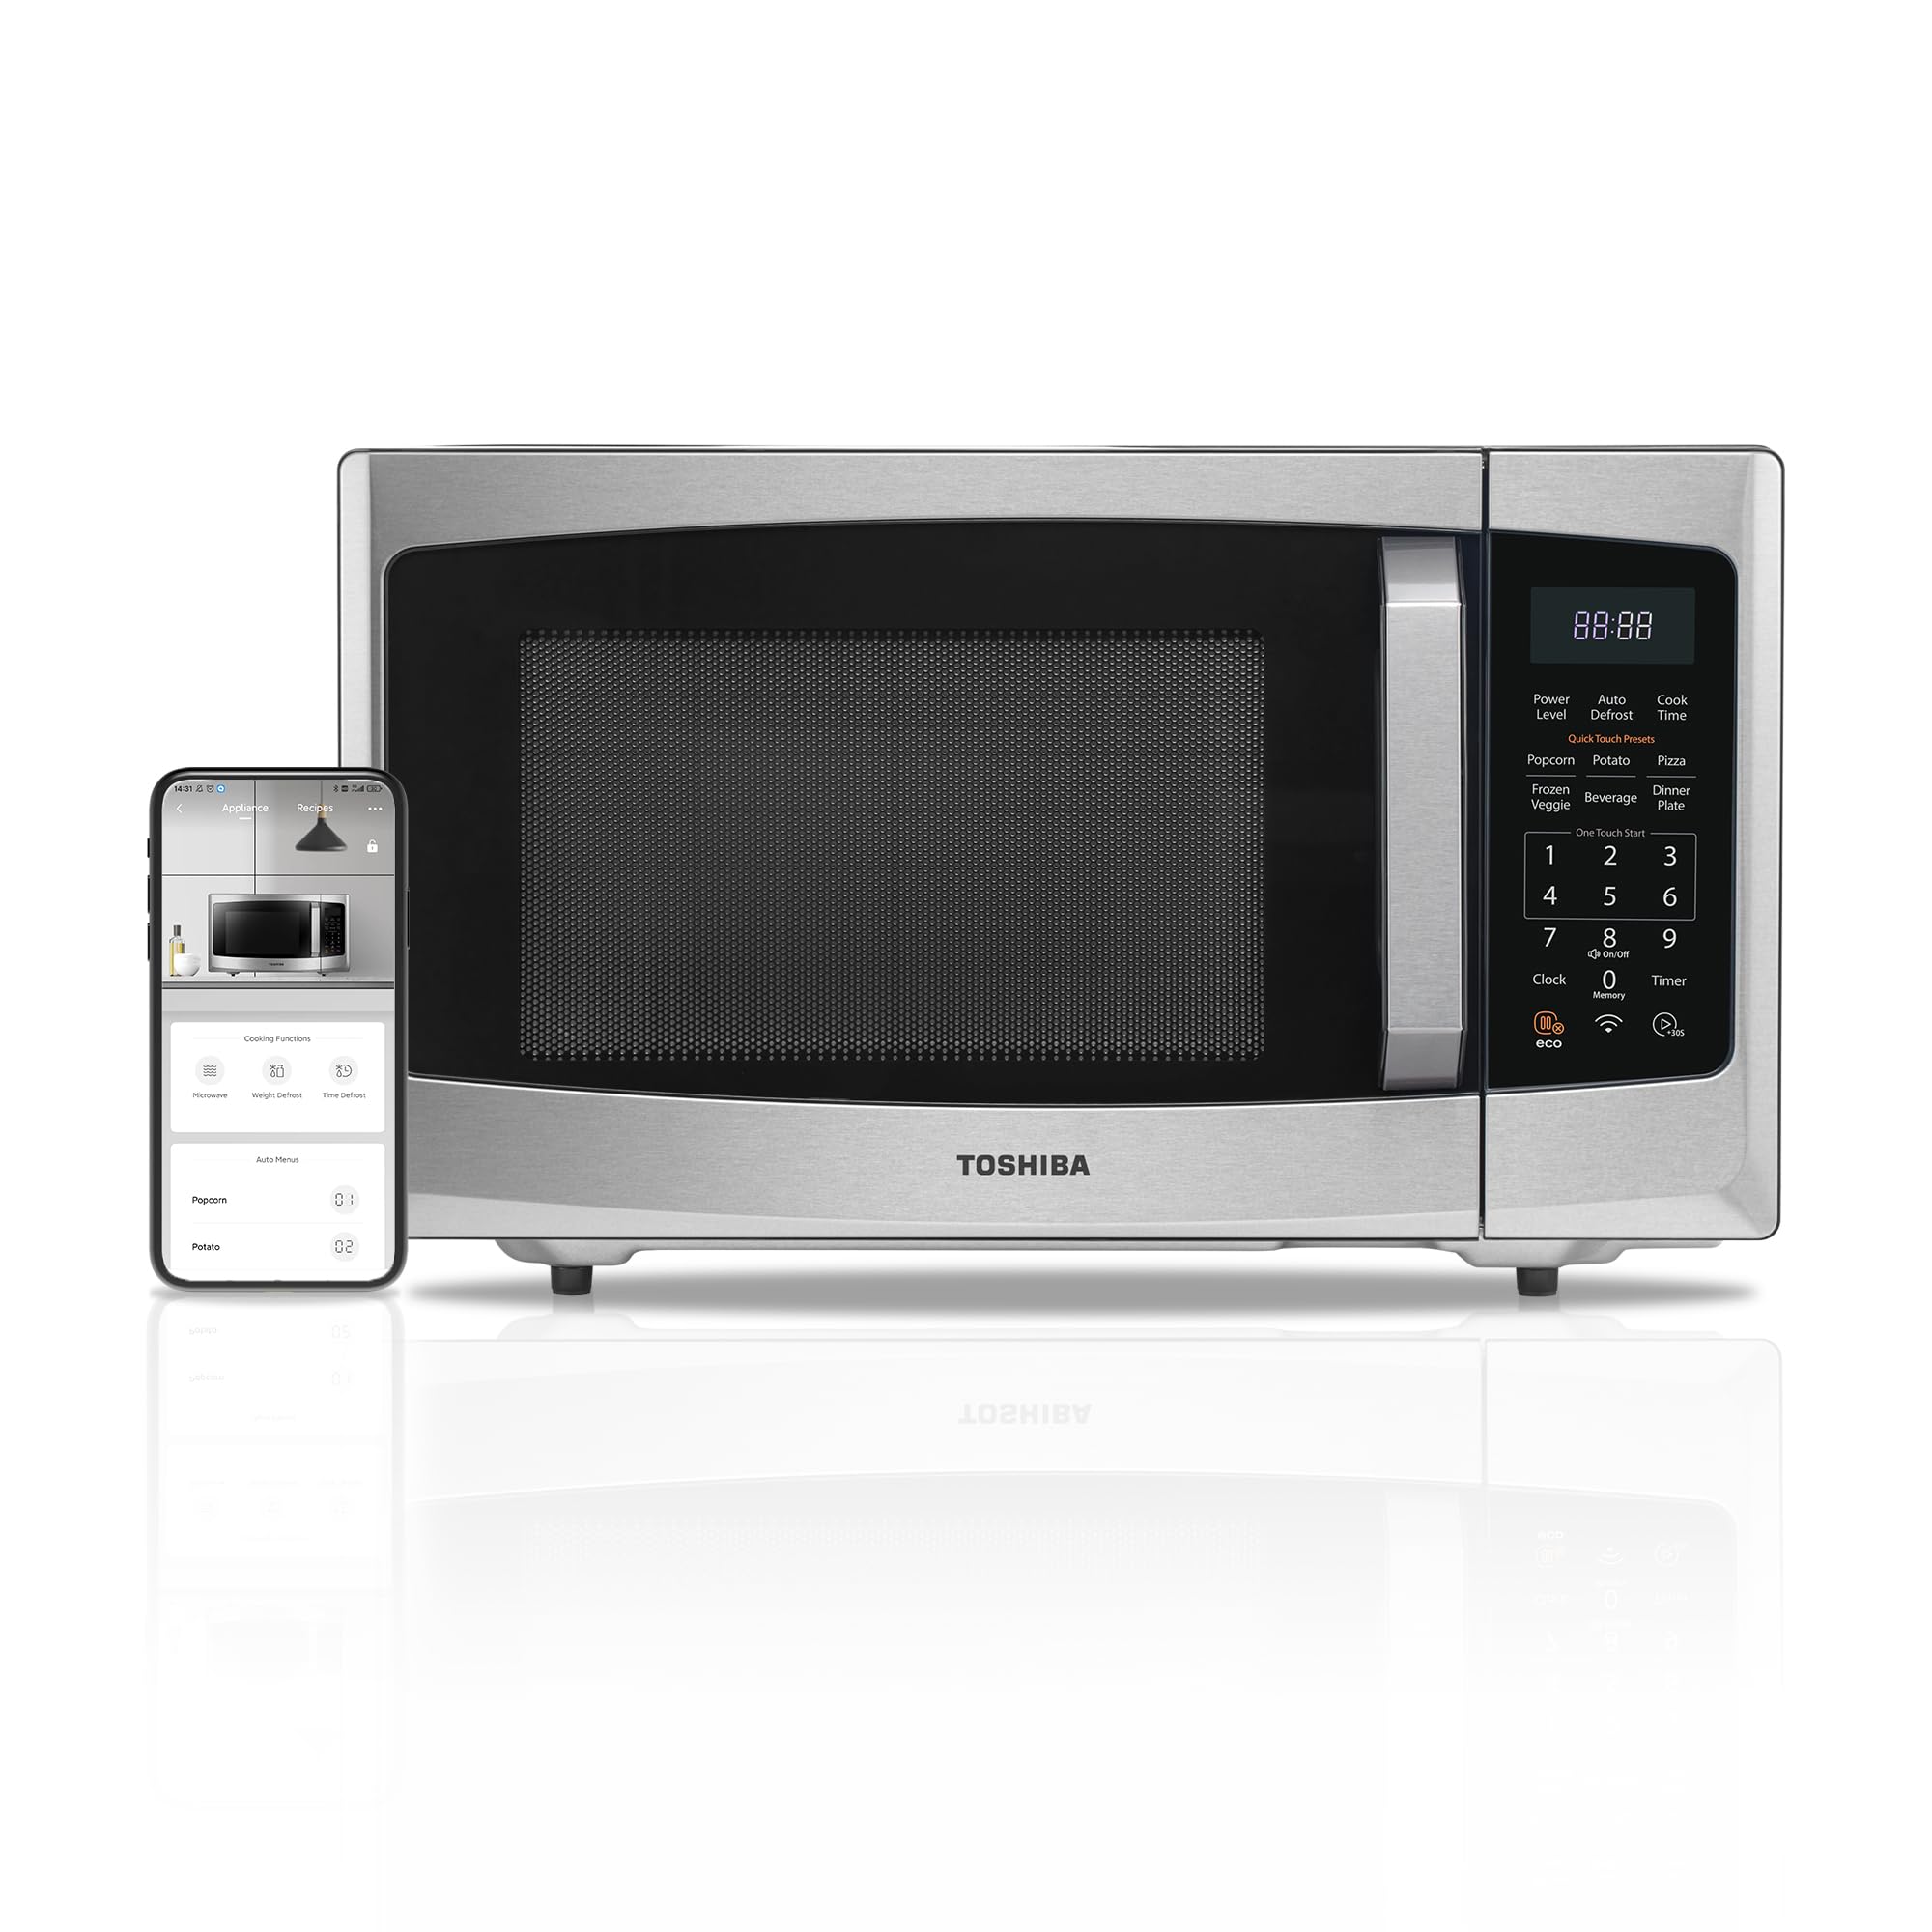 Toshiba ML-SEM23P(SS) Smart Countertop Microwave, Voice Control with Alexa, Free Recipes in APP, Kitchen Essentials, Mute Function & ECO Mode, 900W, 0.9 Cu Ft, With 10.6